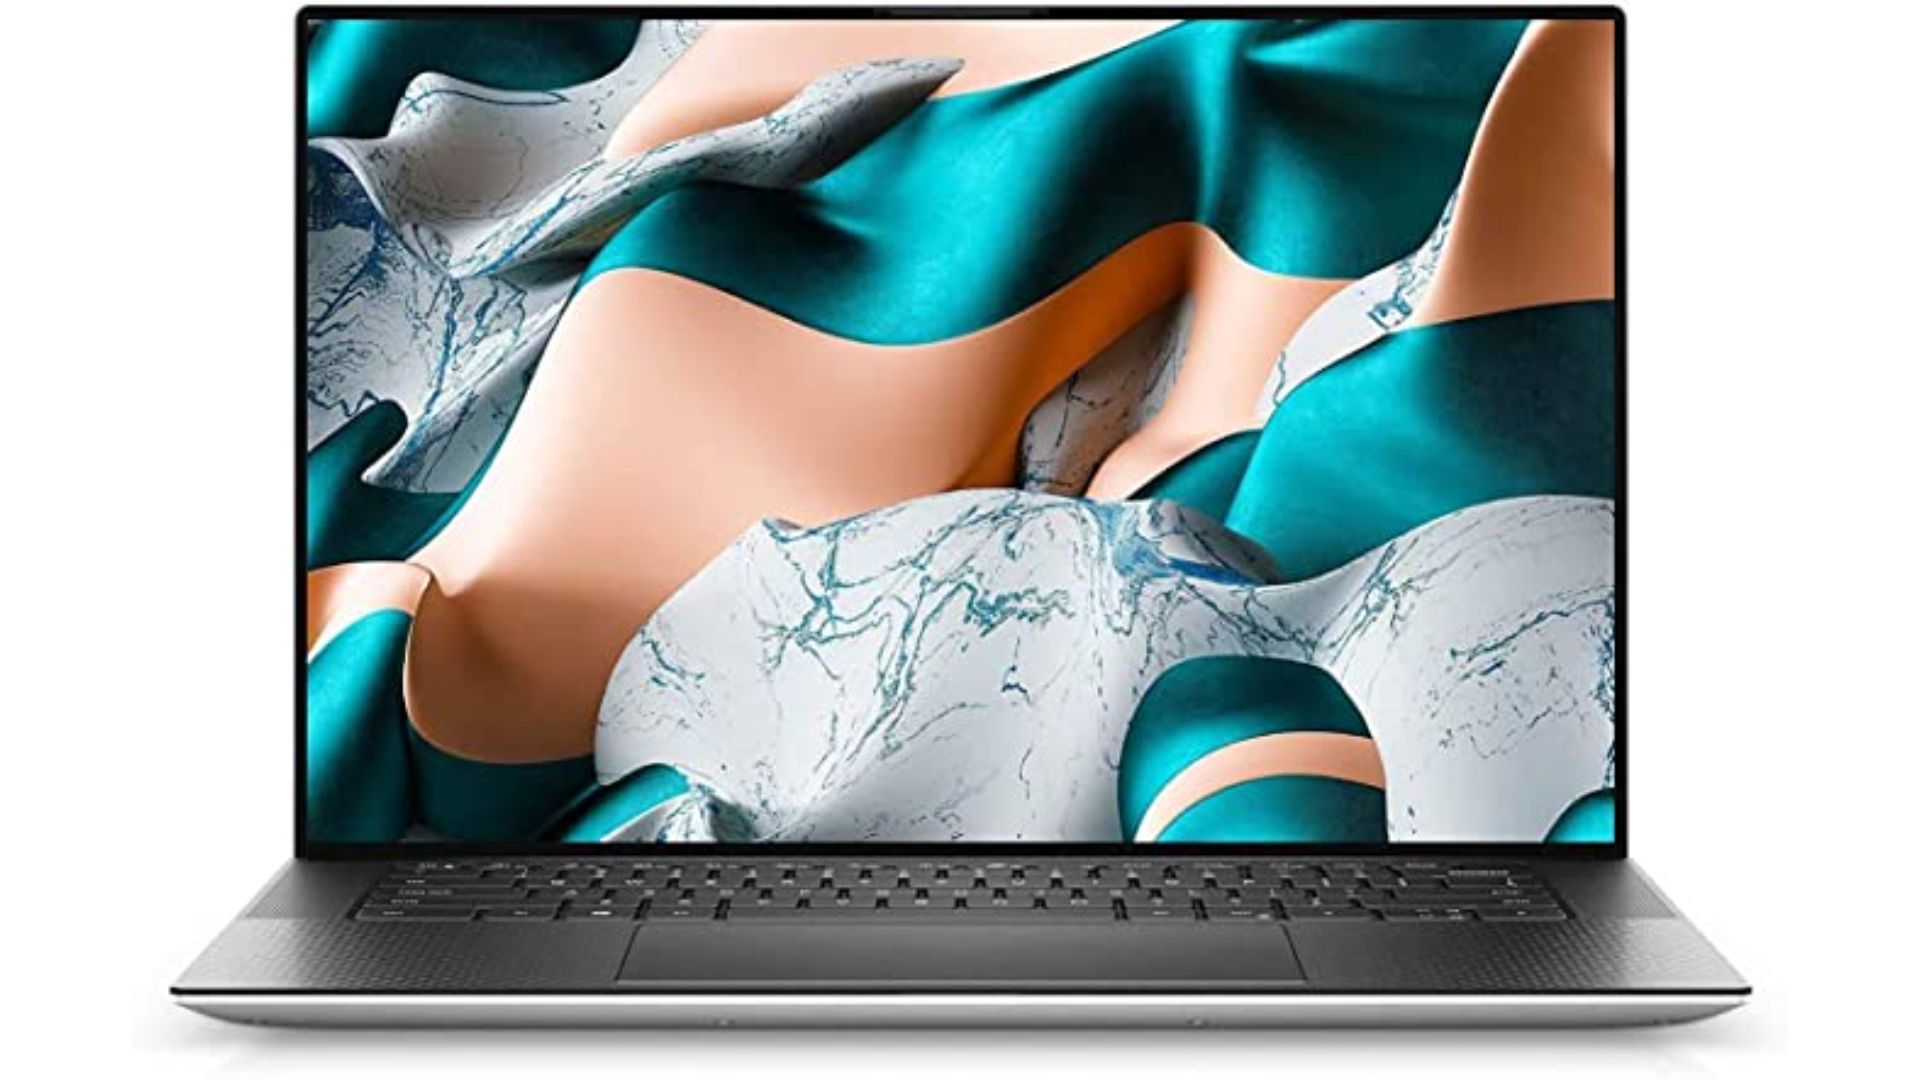 Dell XPS 15 - Best High-Performing Dell Laptop for Art & Artist 